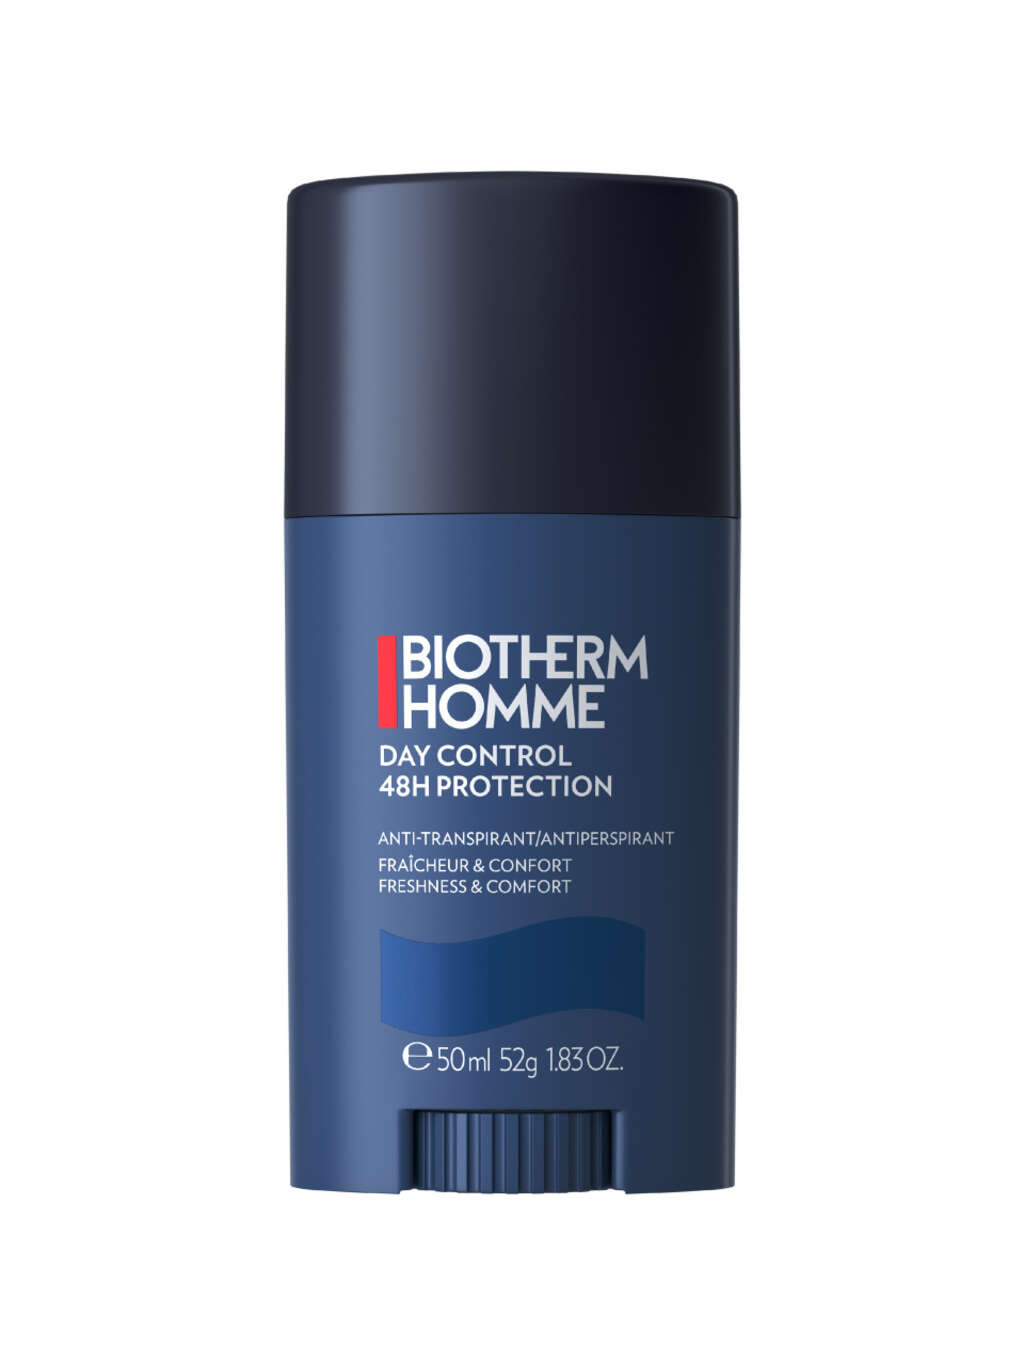 Biotherm Homme Day Control Déodorant Stick